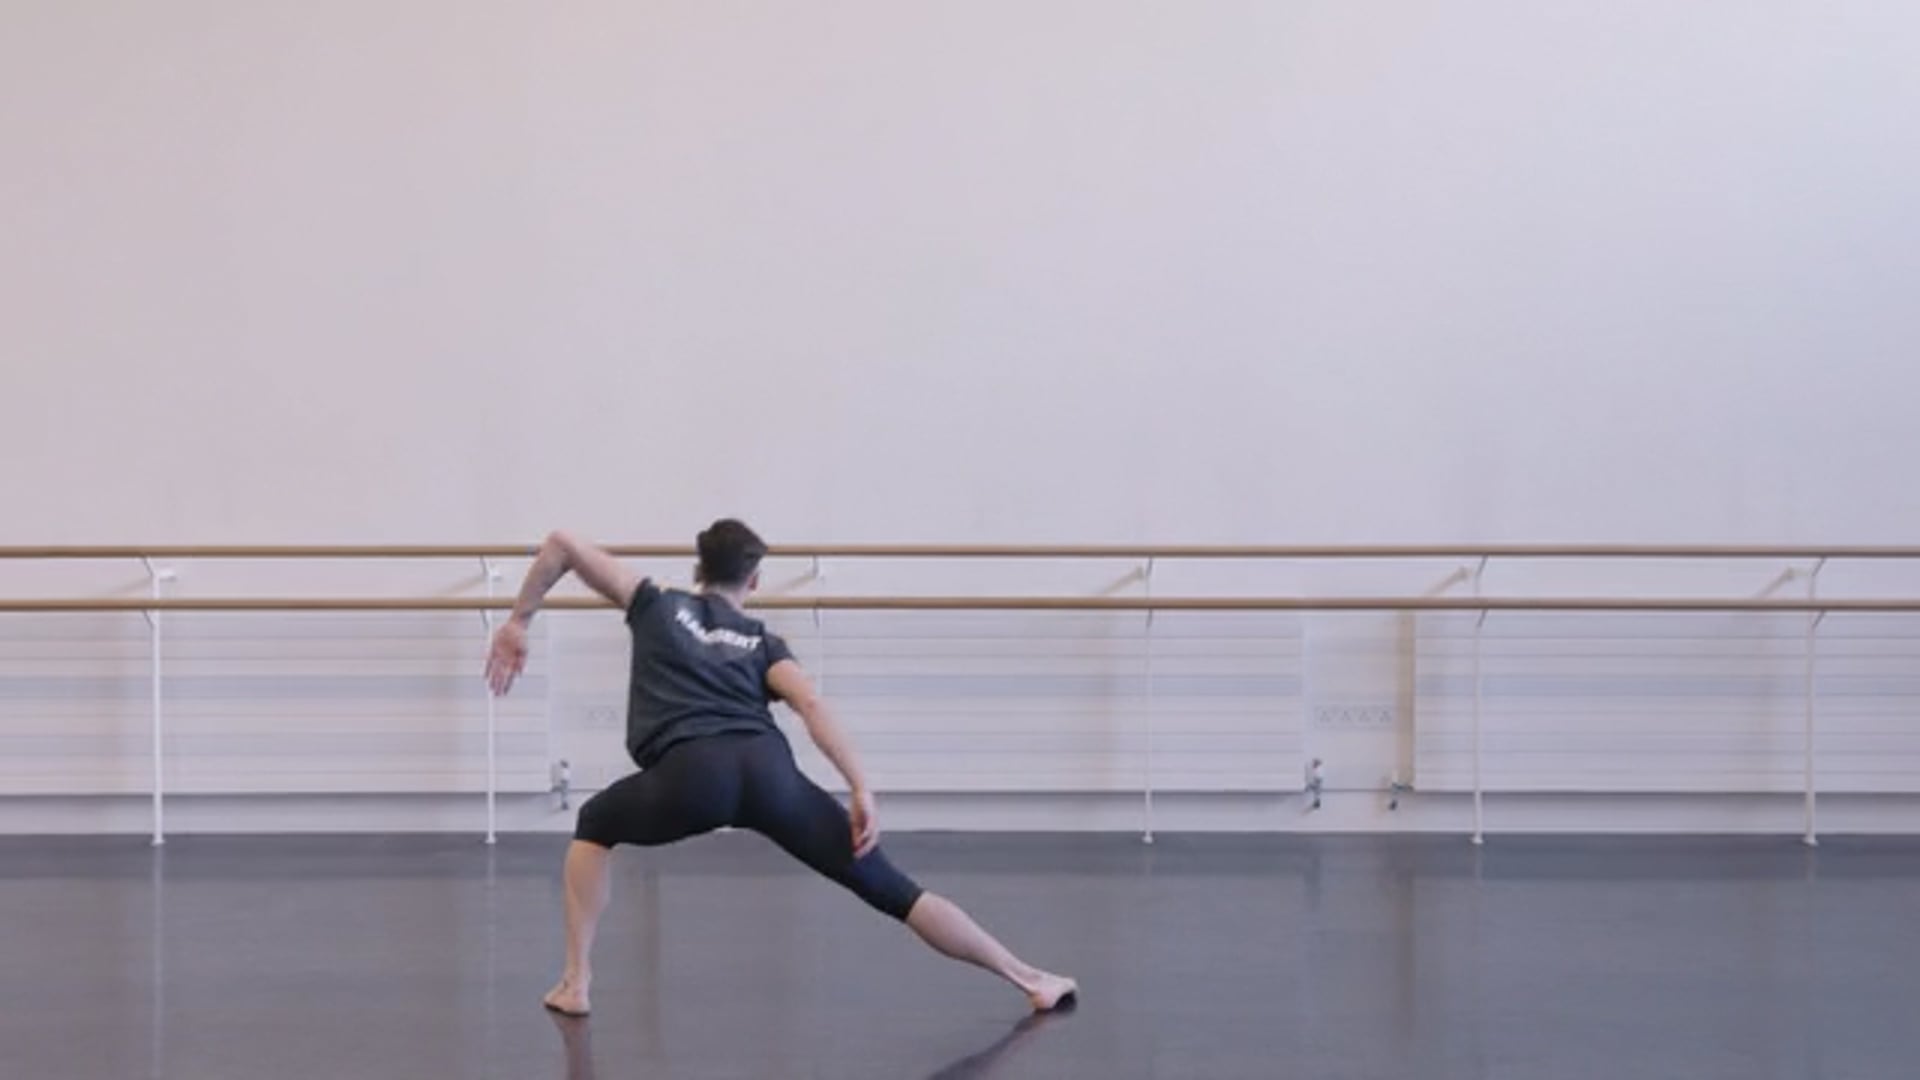 A woman in a black shirt is doing a ballet pose.